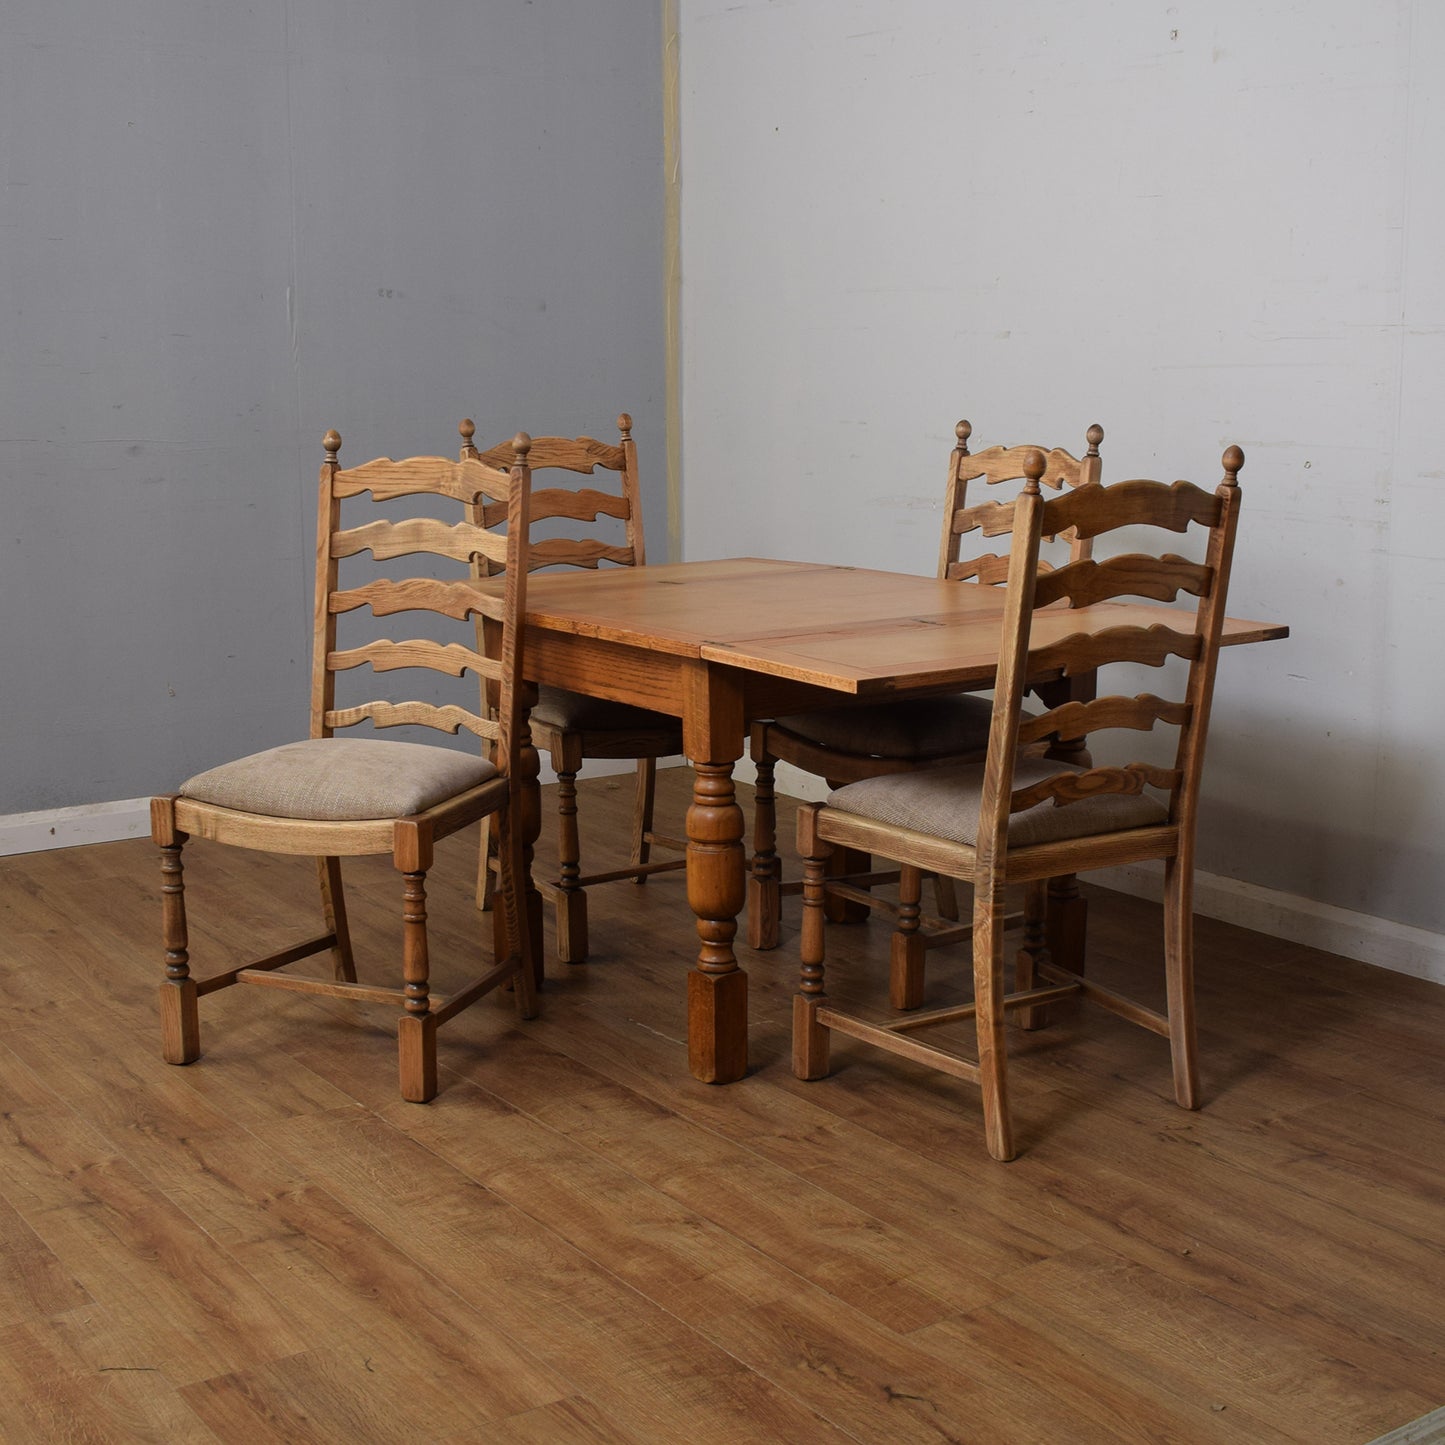 Extending Vintage Folding Table and Four Chairs